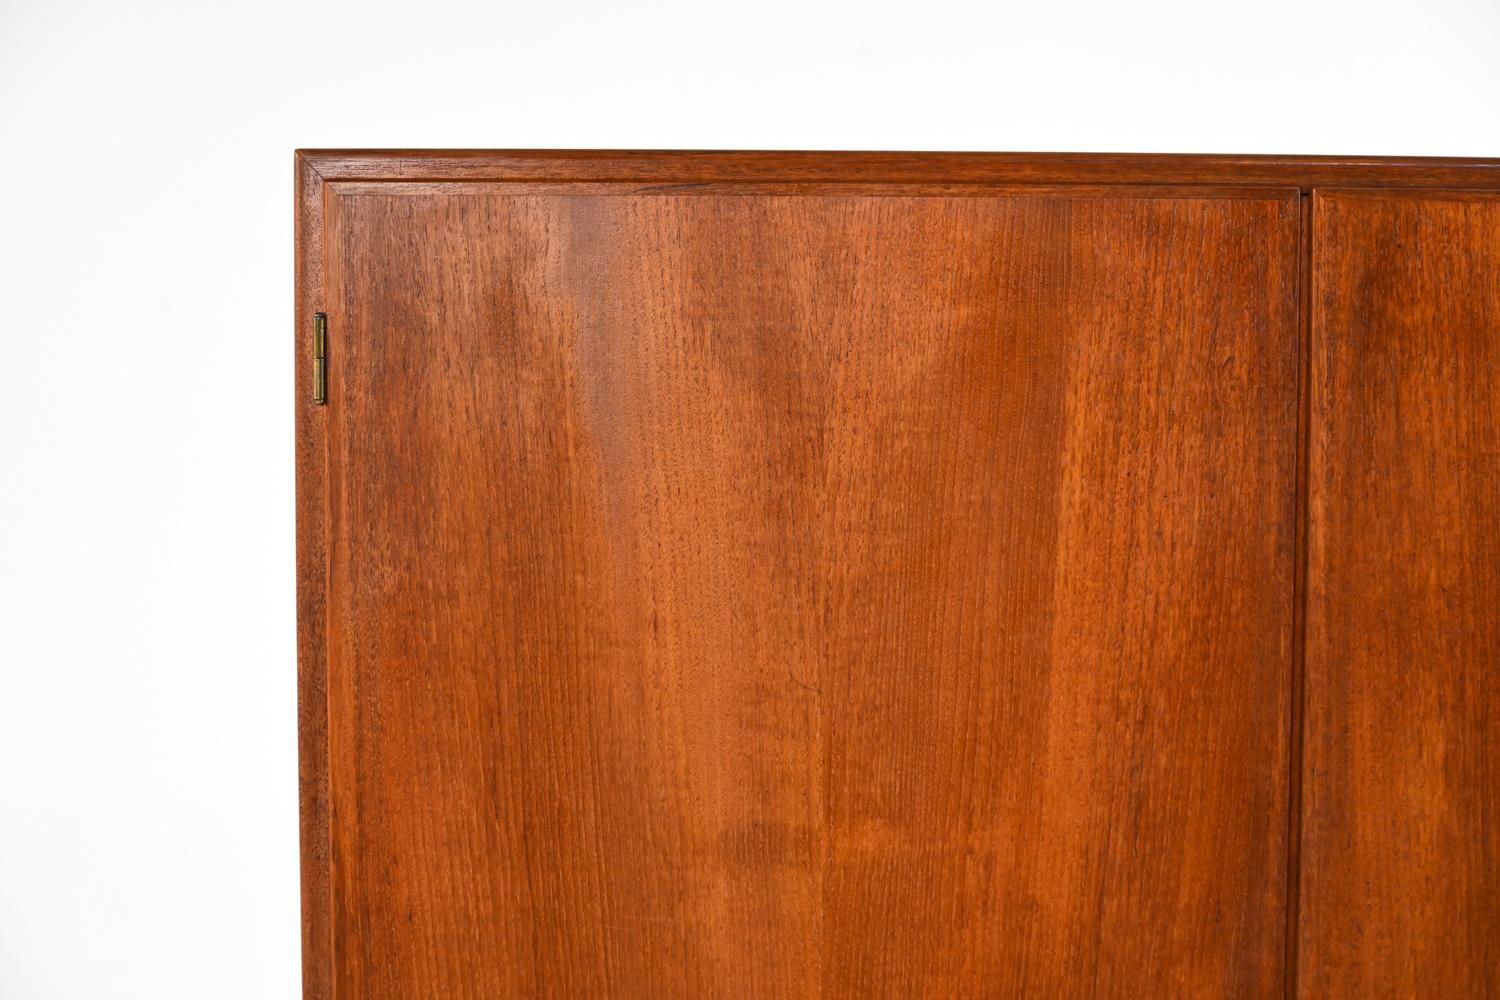 A rare wardrobe or tall storage cupboard in teak veneer, with seven adjustable maple shelves, two removable drawers, and a rounded tapered oak base. Designed by Børge Mogensen for Søborg Møbelfabrik c. 1950's. Key included.